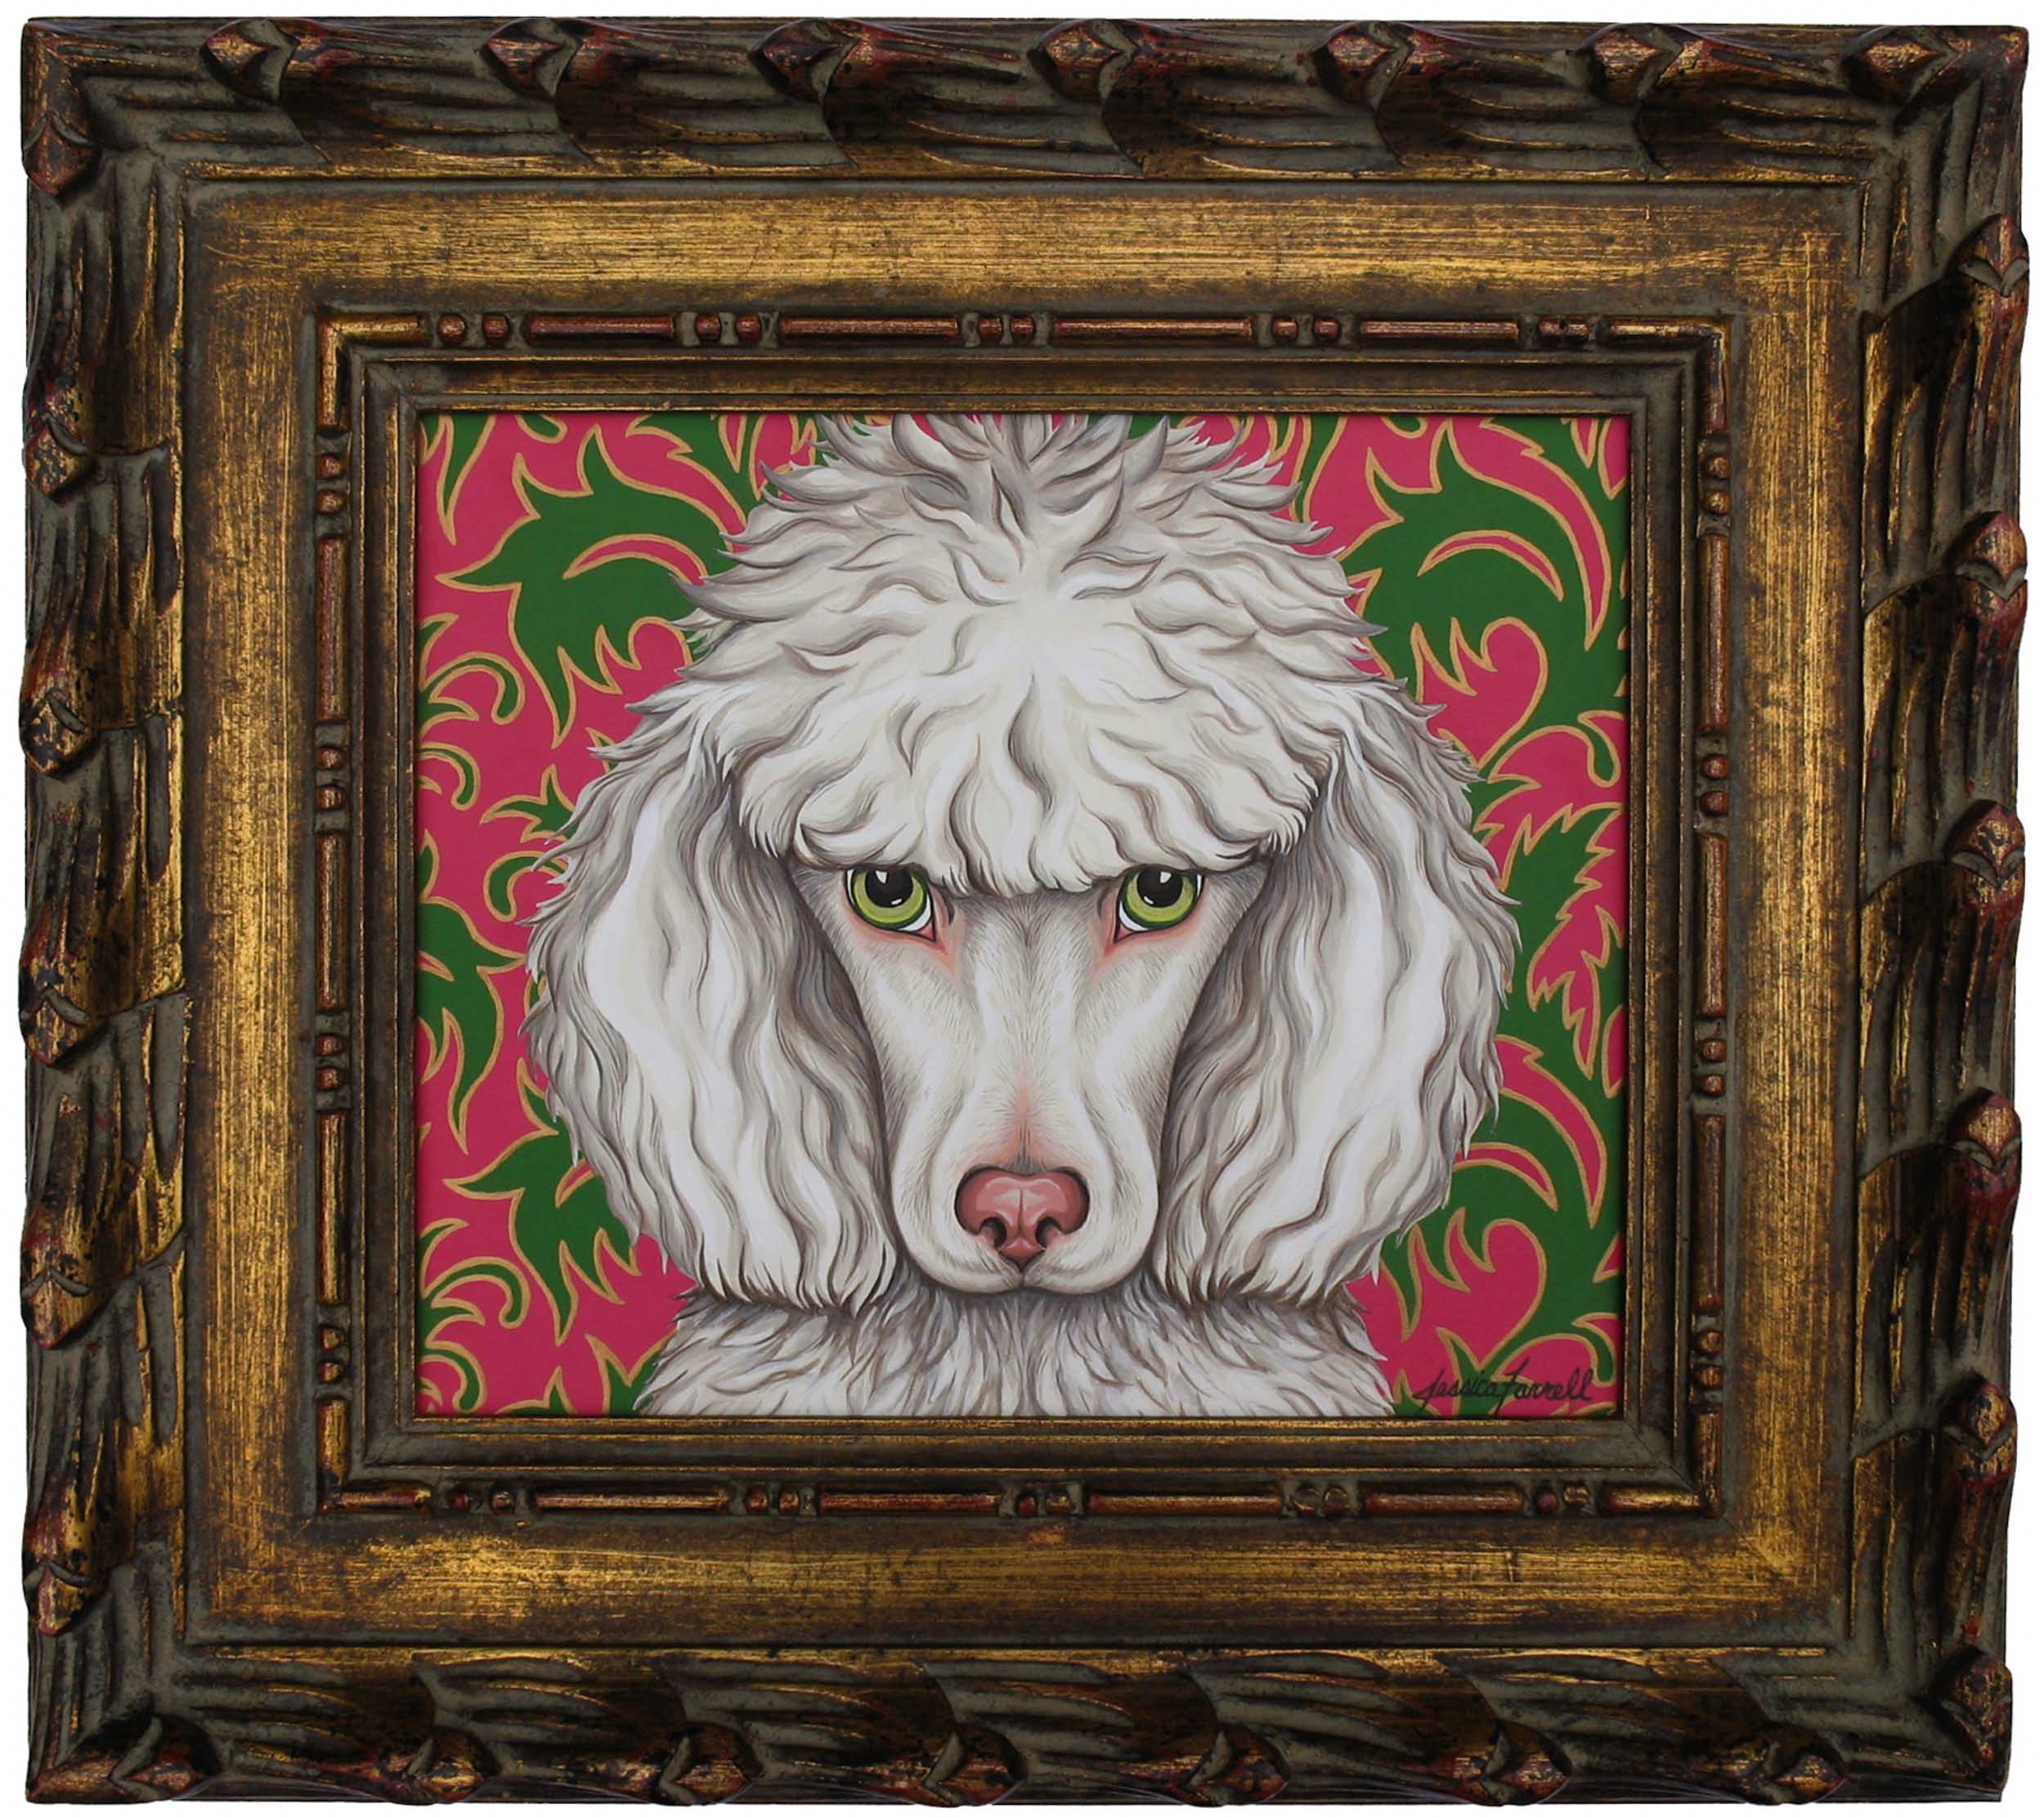   Poodle,  Acrylic on wood with vintage frame, 16 1 ½ x 18 ½ inches (framed)  available 